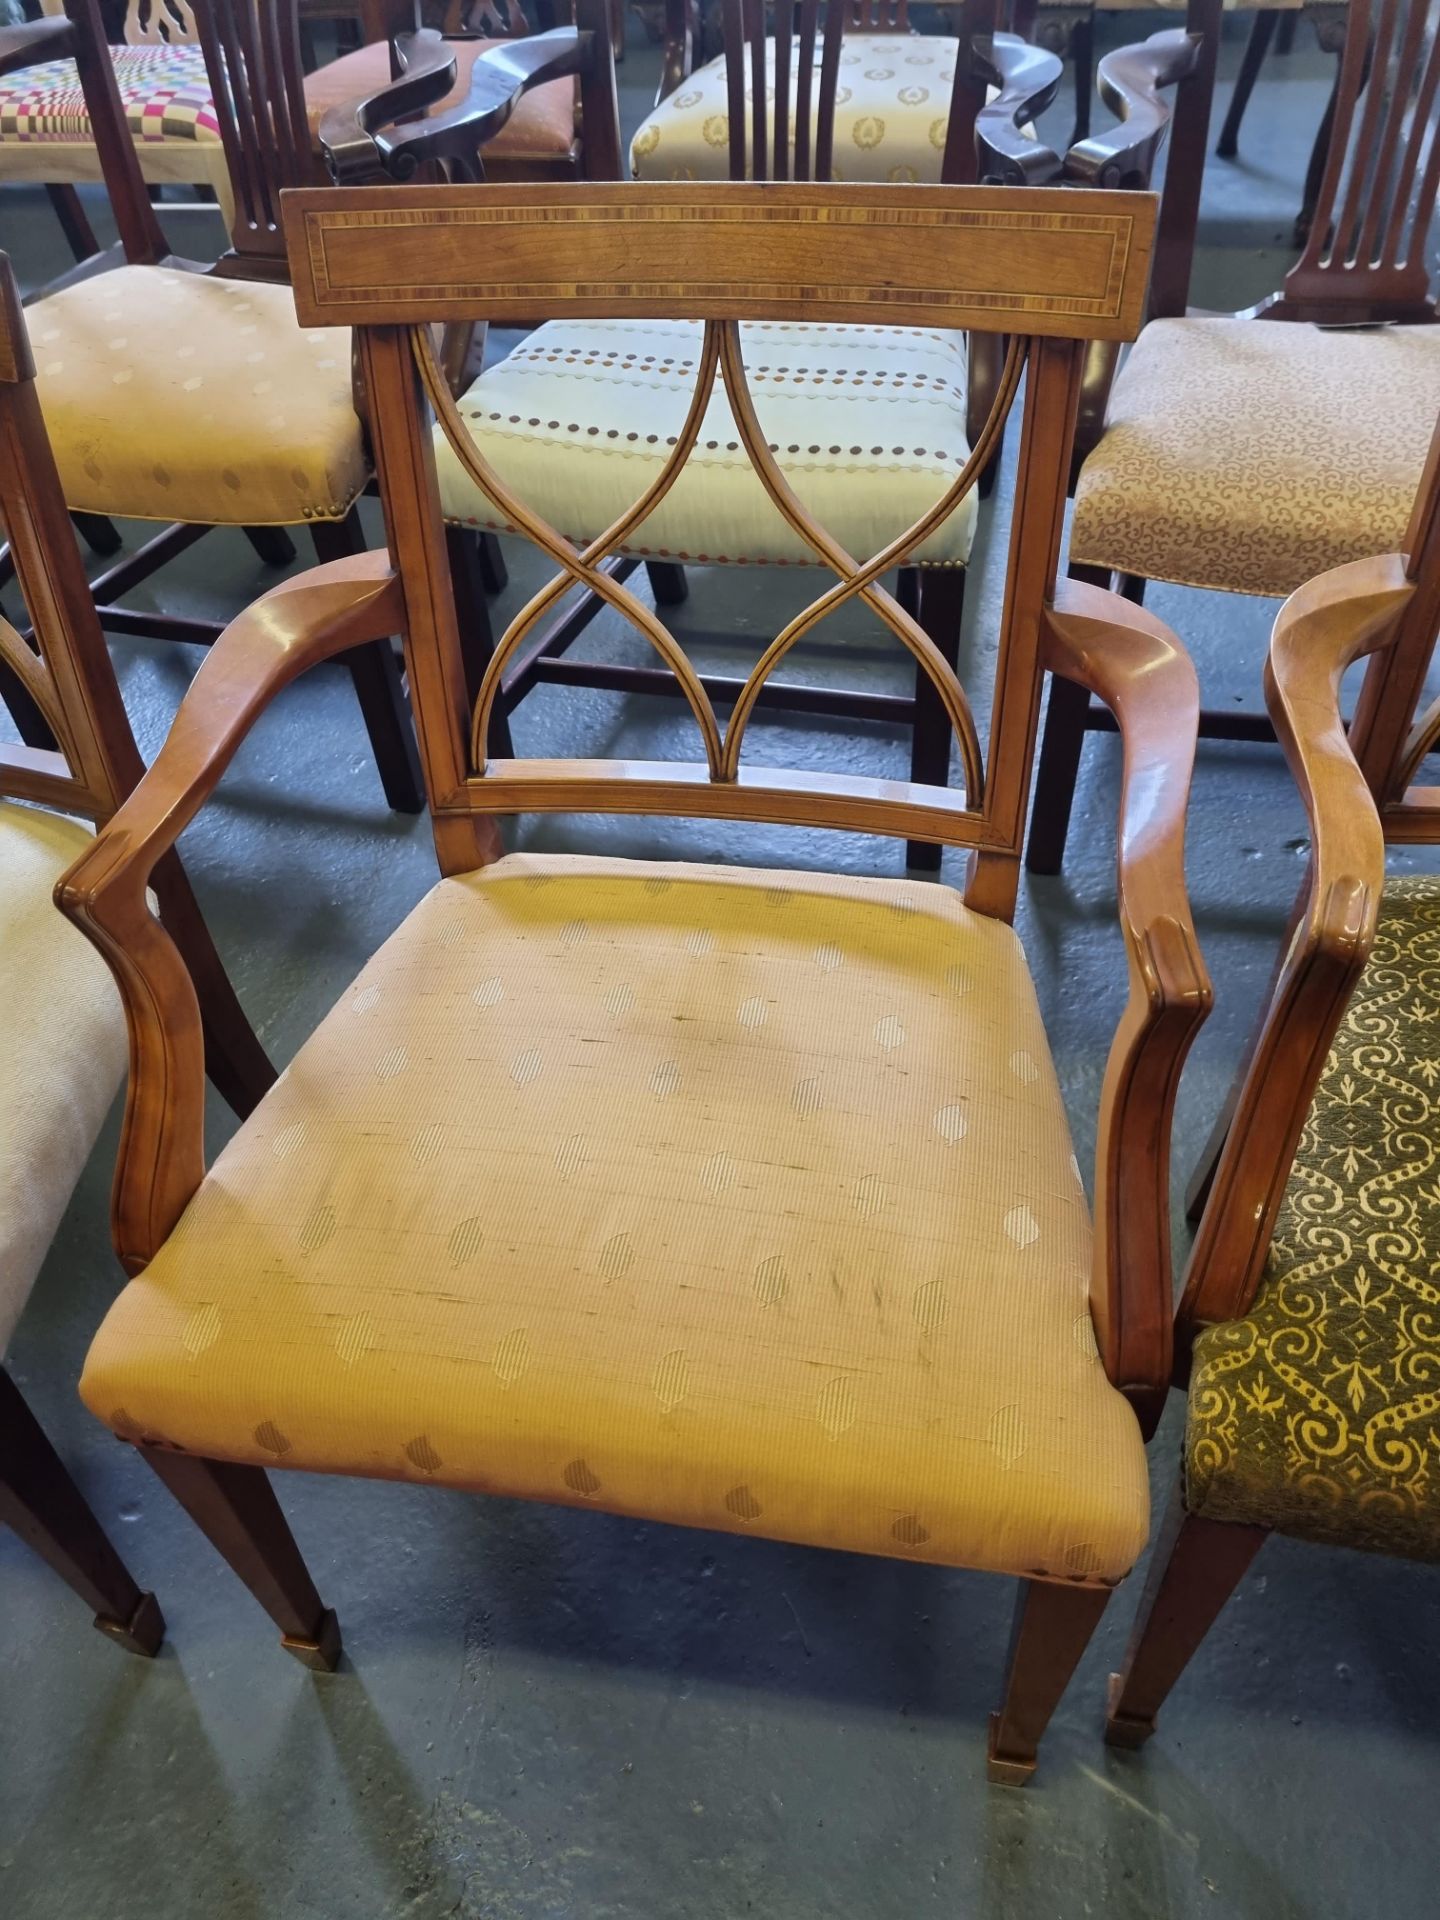 3 X Arthur Brett Sheraton-Style Cherrywood Upholstered Dining Chairs With Tulip-Wood Inlay In The - Image 3 of 5